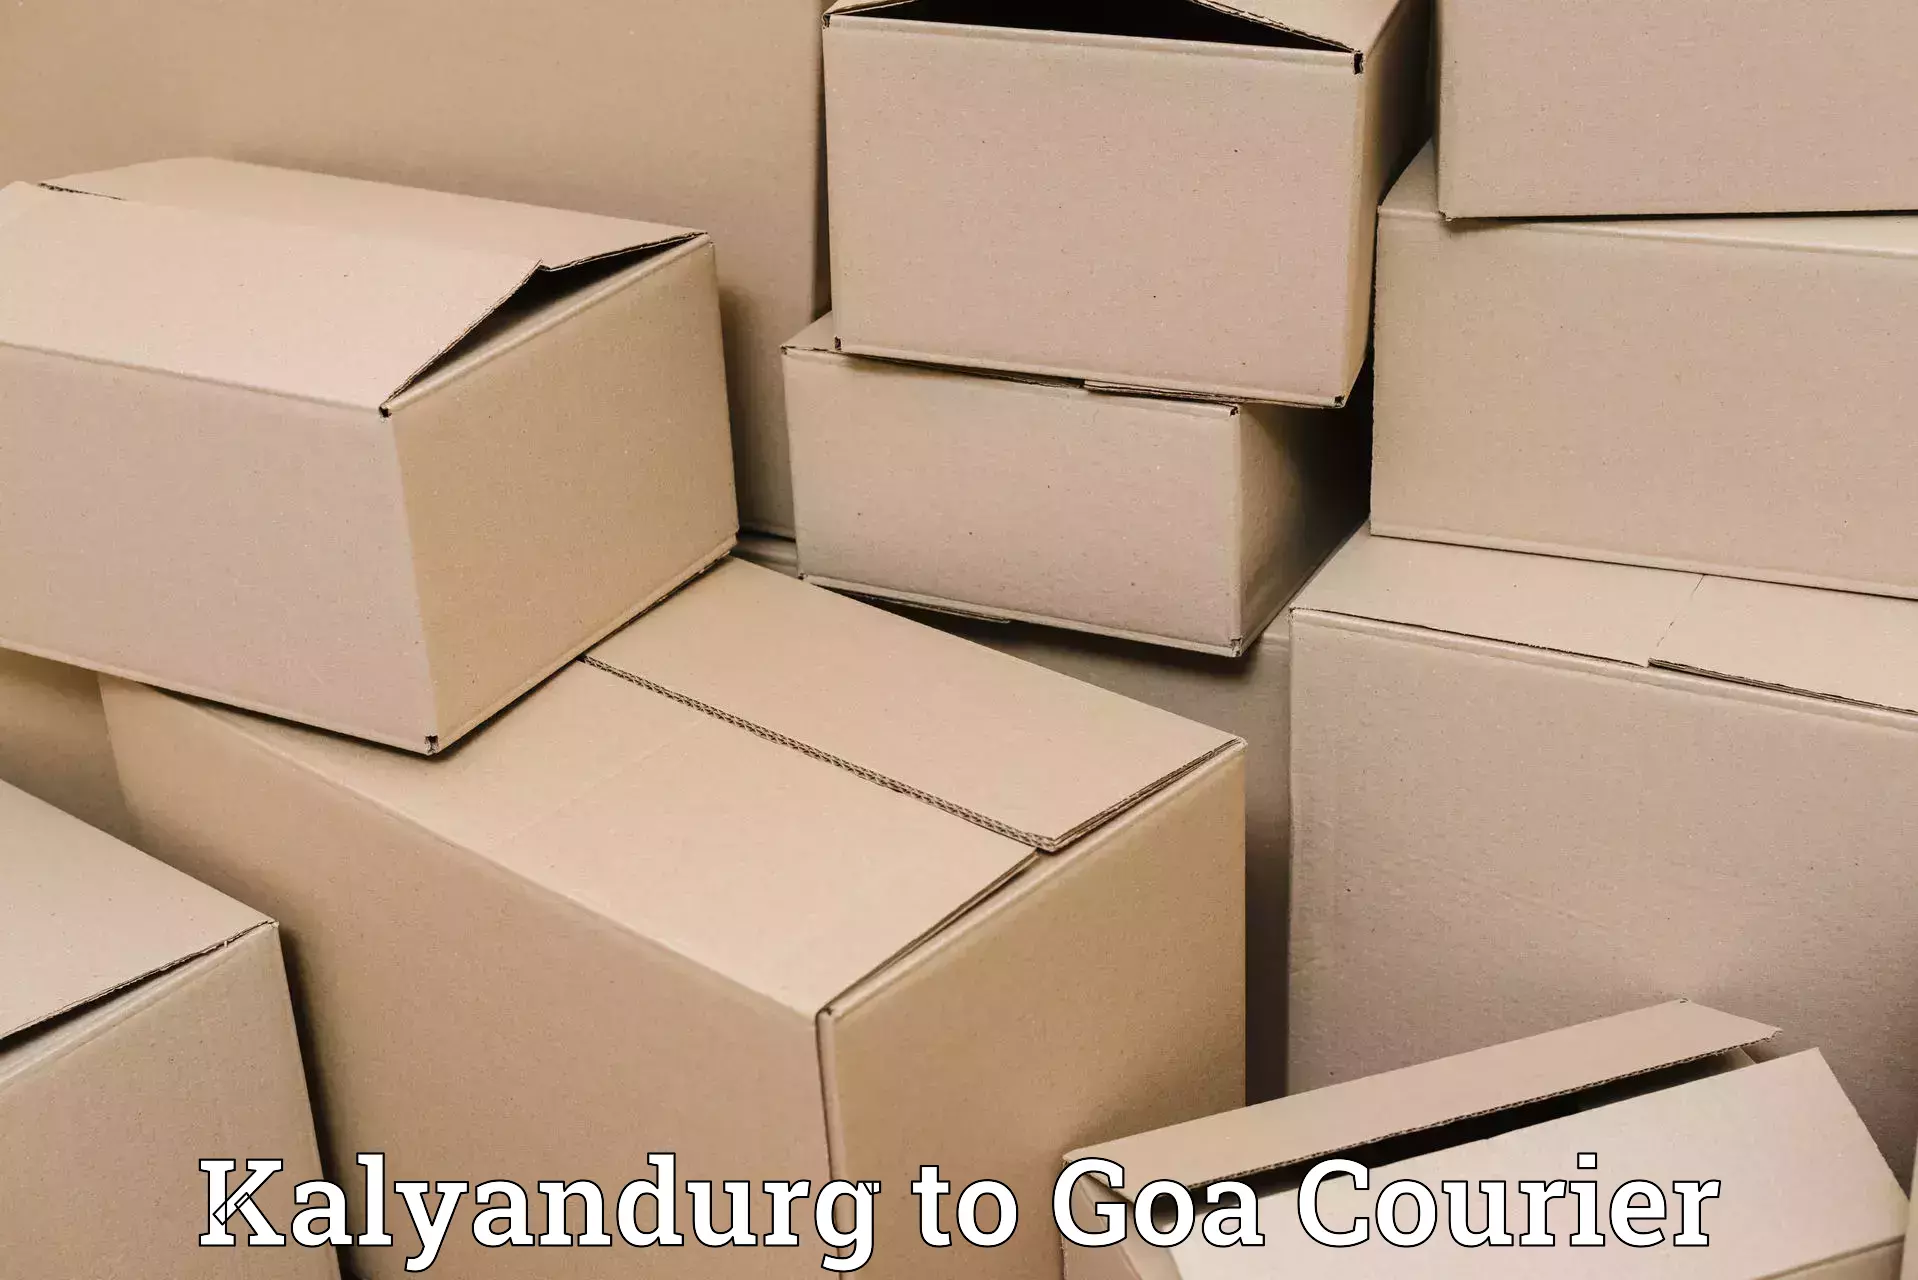 End-to-end delivery in Kalyandurg to Goa